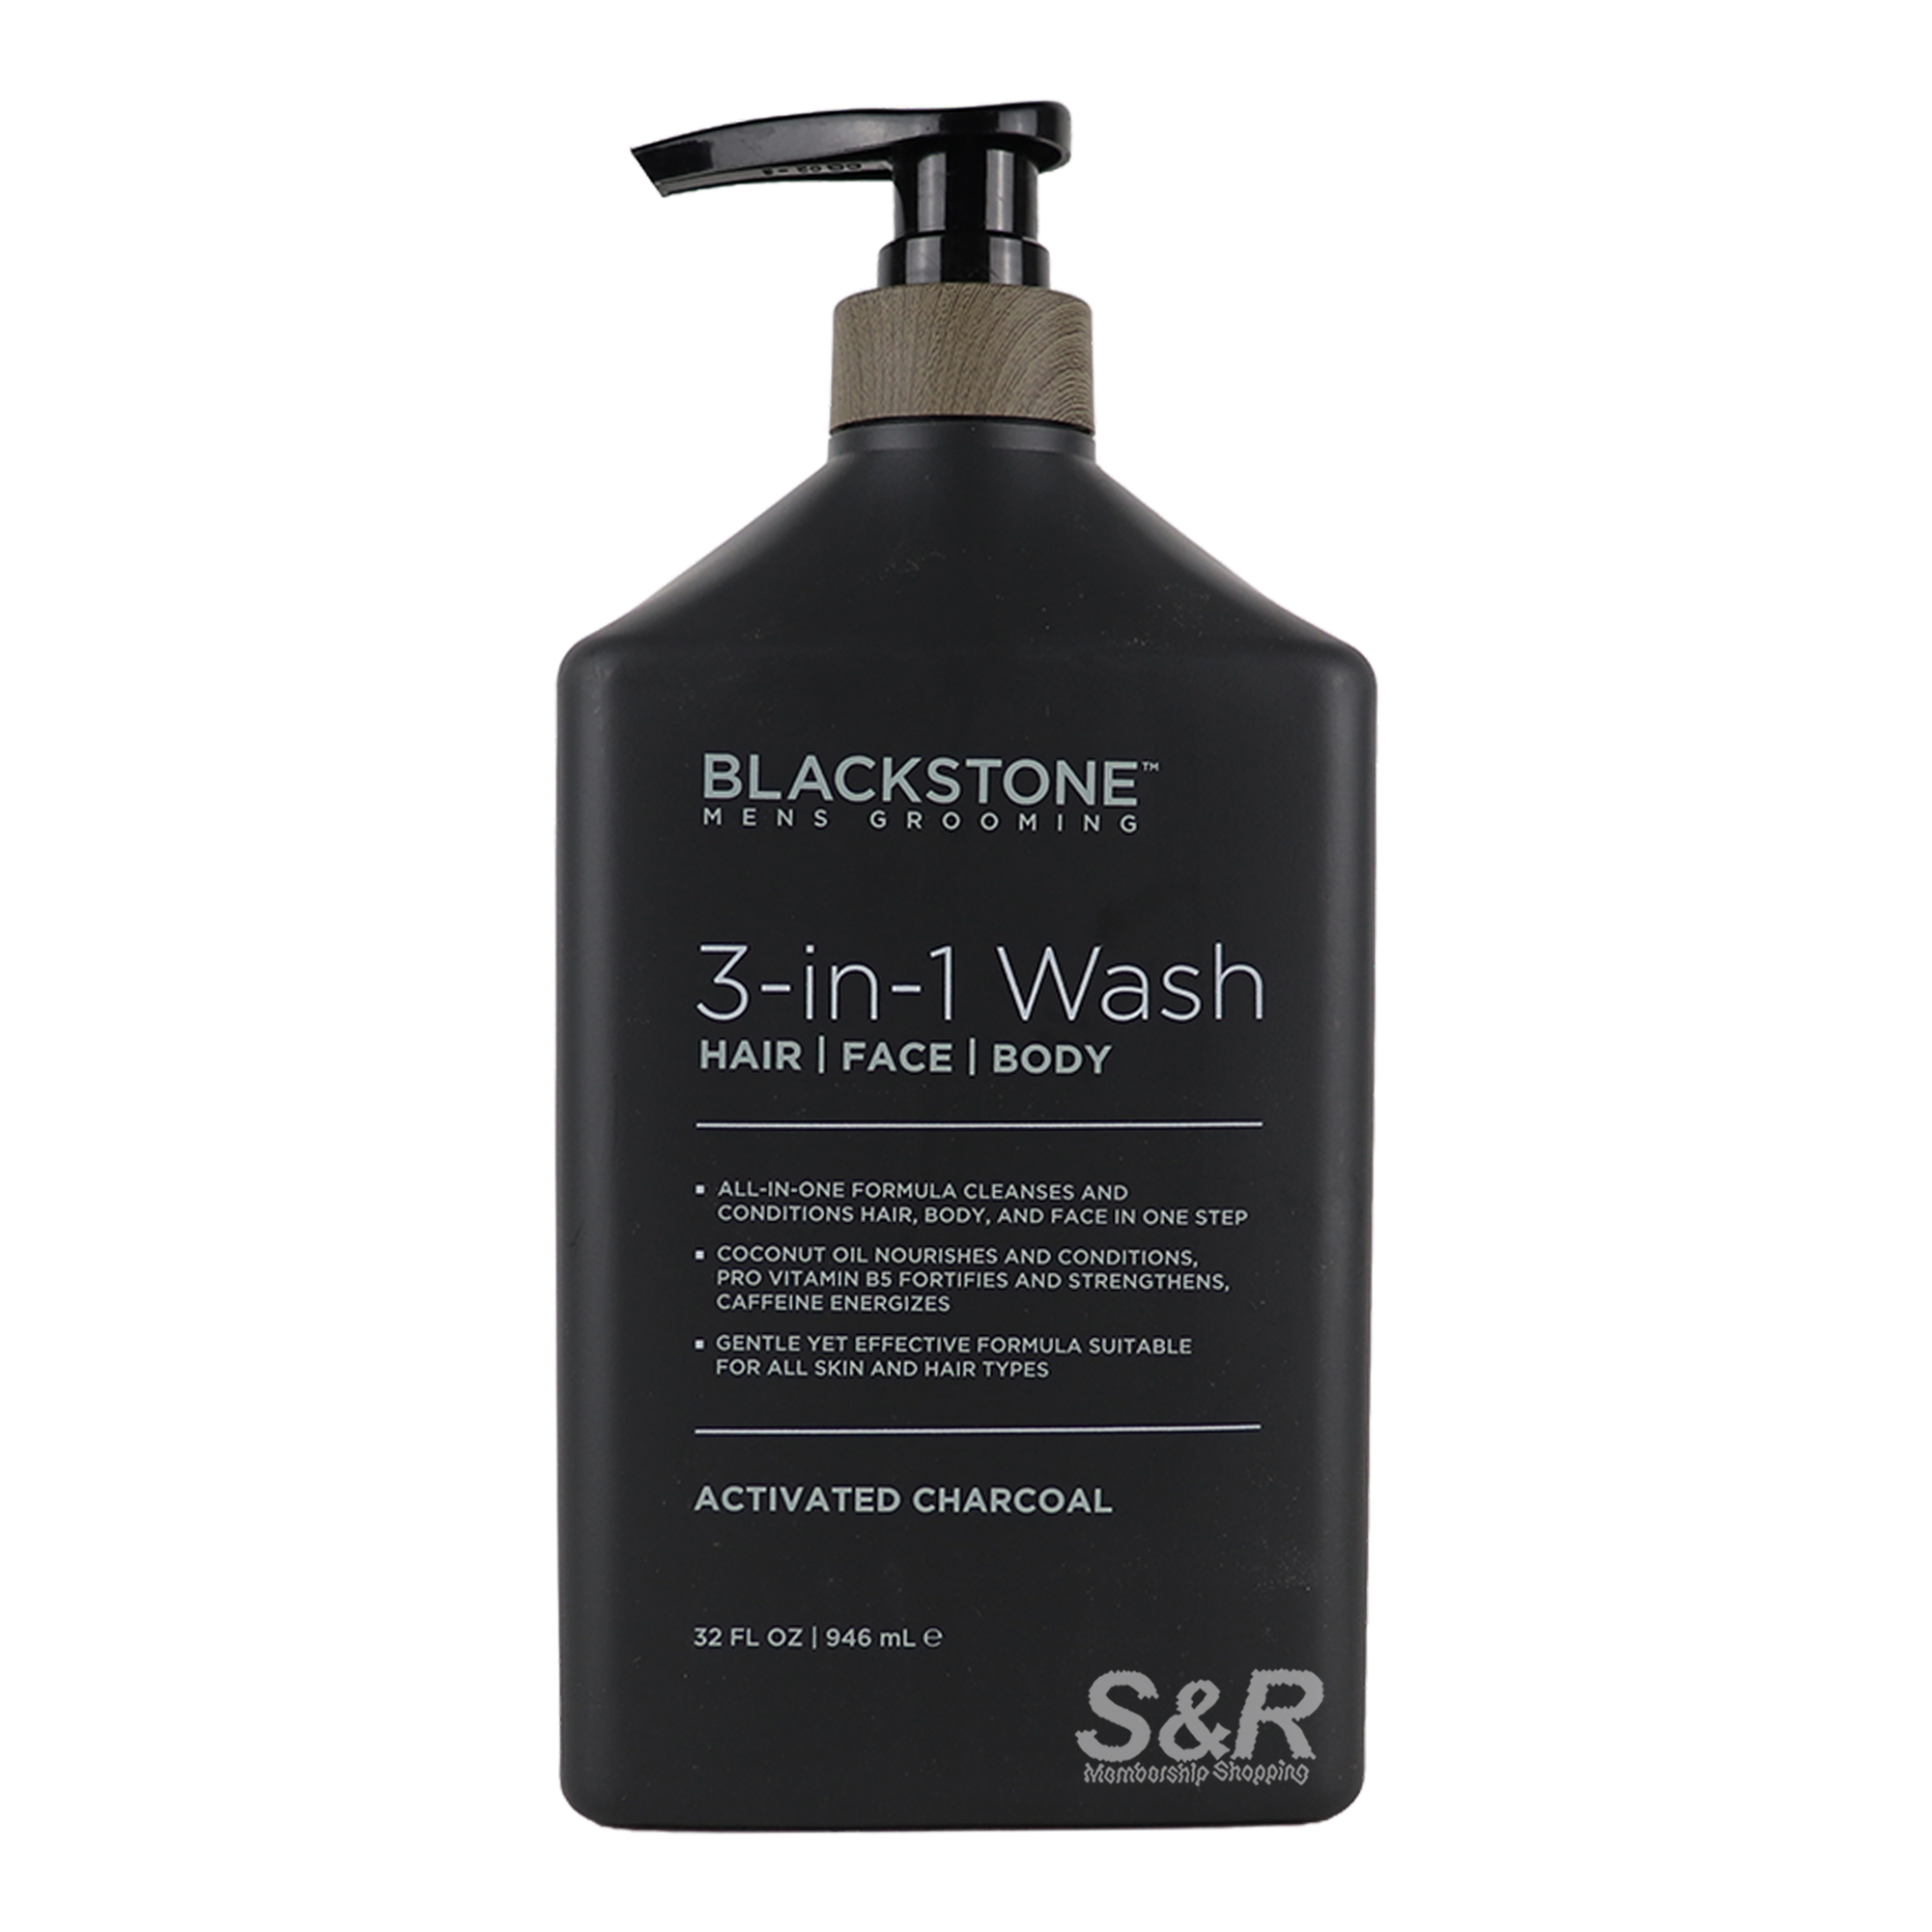 Blackstone 3-in-1 Har, Face, and Body Wash Activated Charcoal 946mL